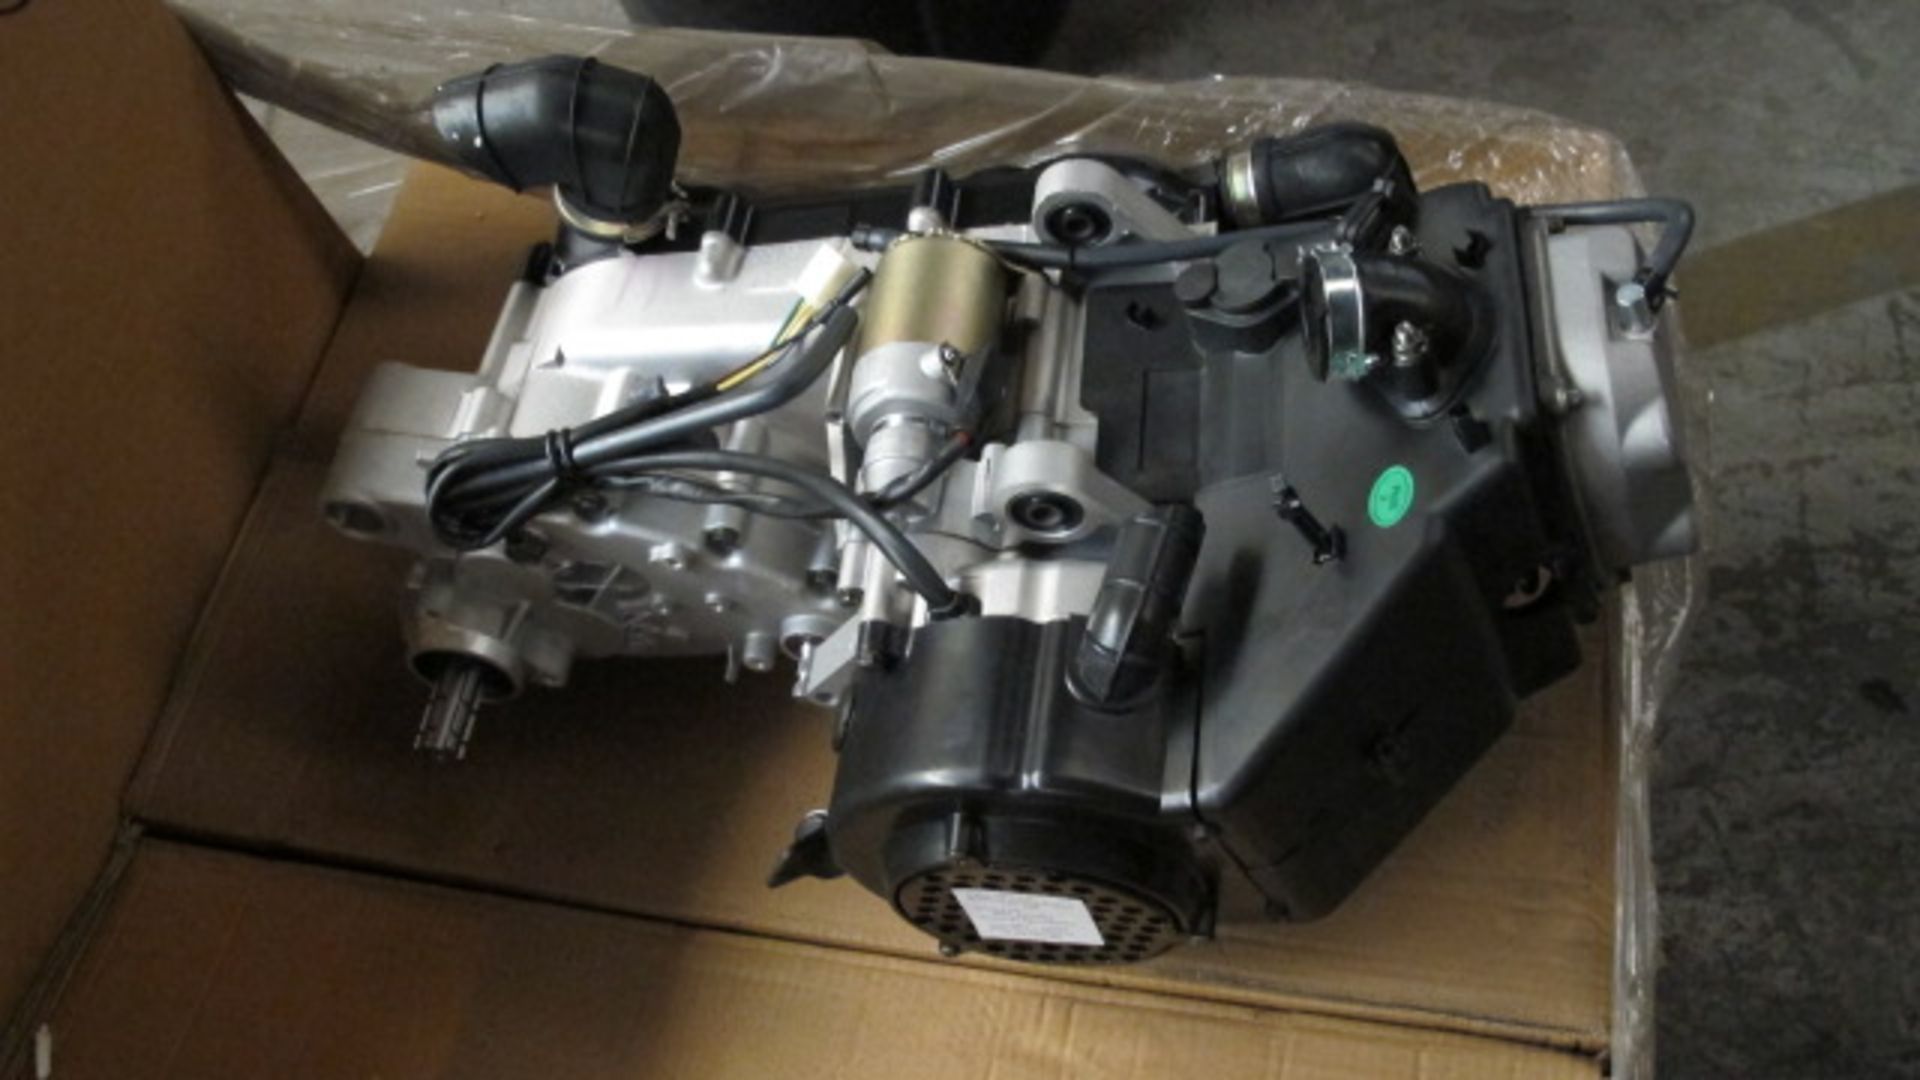 150CC ENGINE ASSEMBLY KIT (ENGINE ONLY) MANUFACTURED BY: ZHEJIANG JINLANG ENGINE CO. LTD